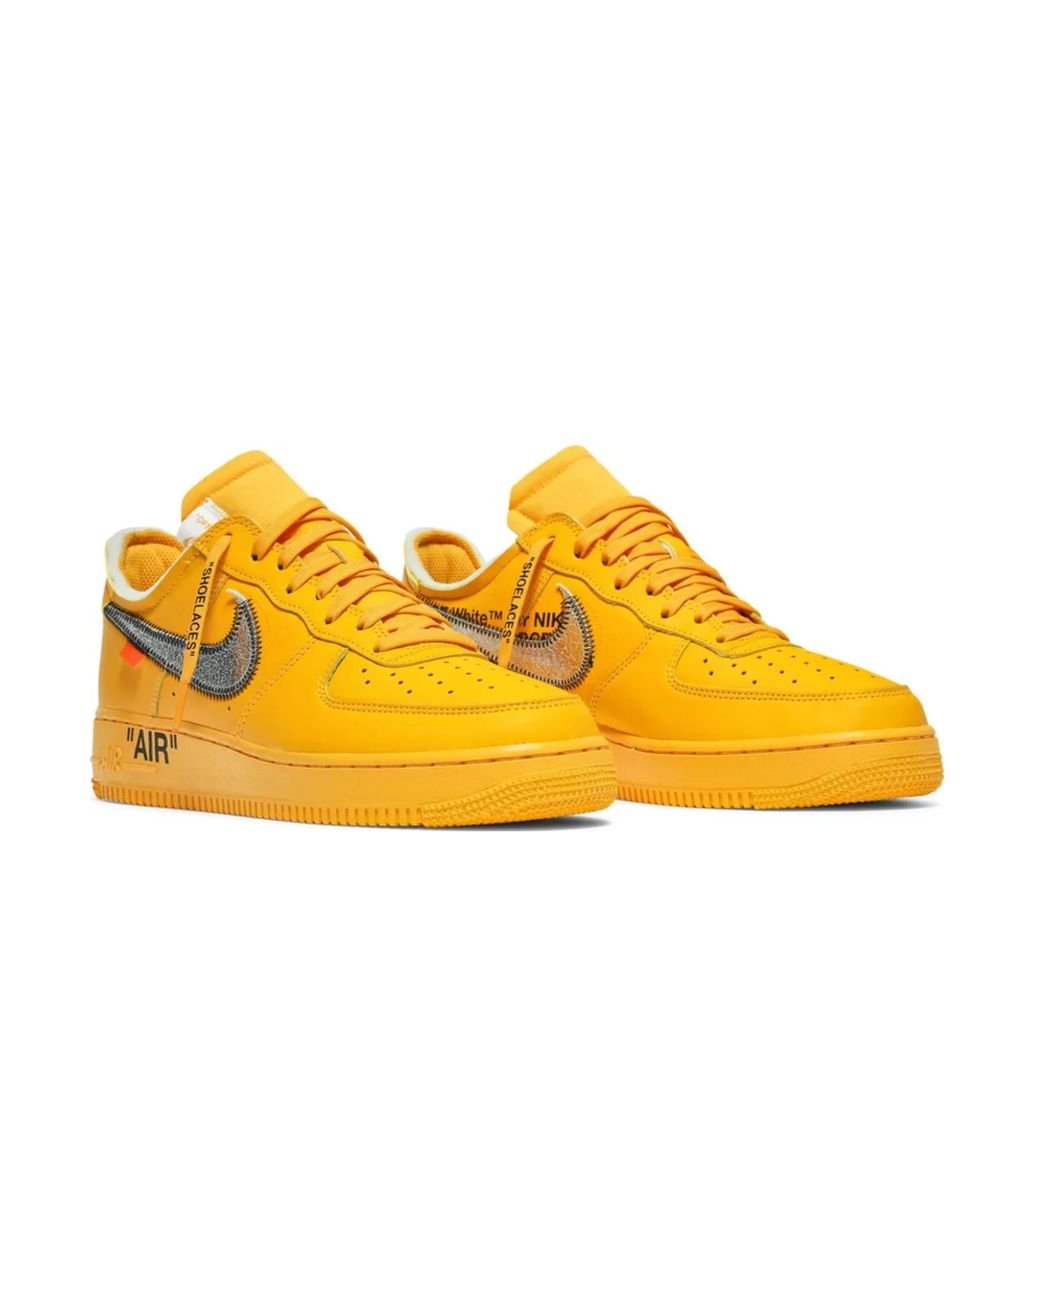 Size+5+-+Nike+Air+Force+1+Low+OFF-WHITE+University+Gold+Metallic+Silver for  sale online